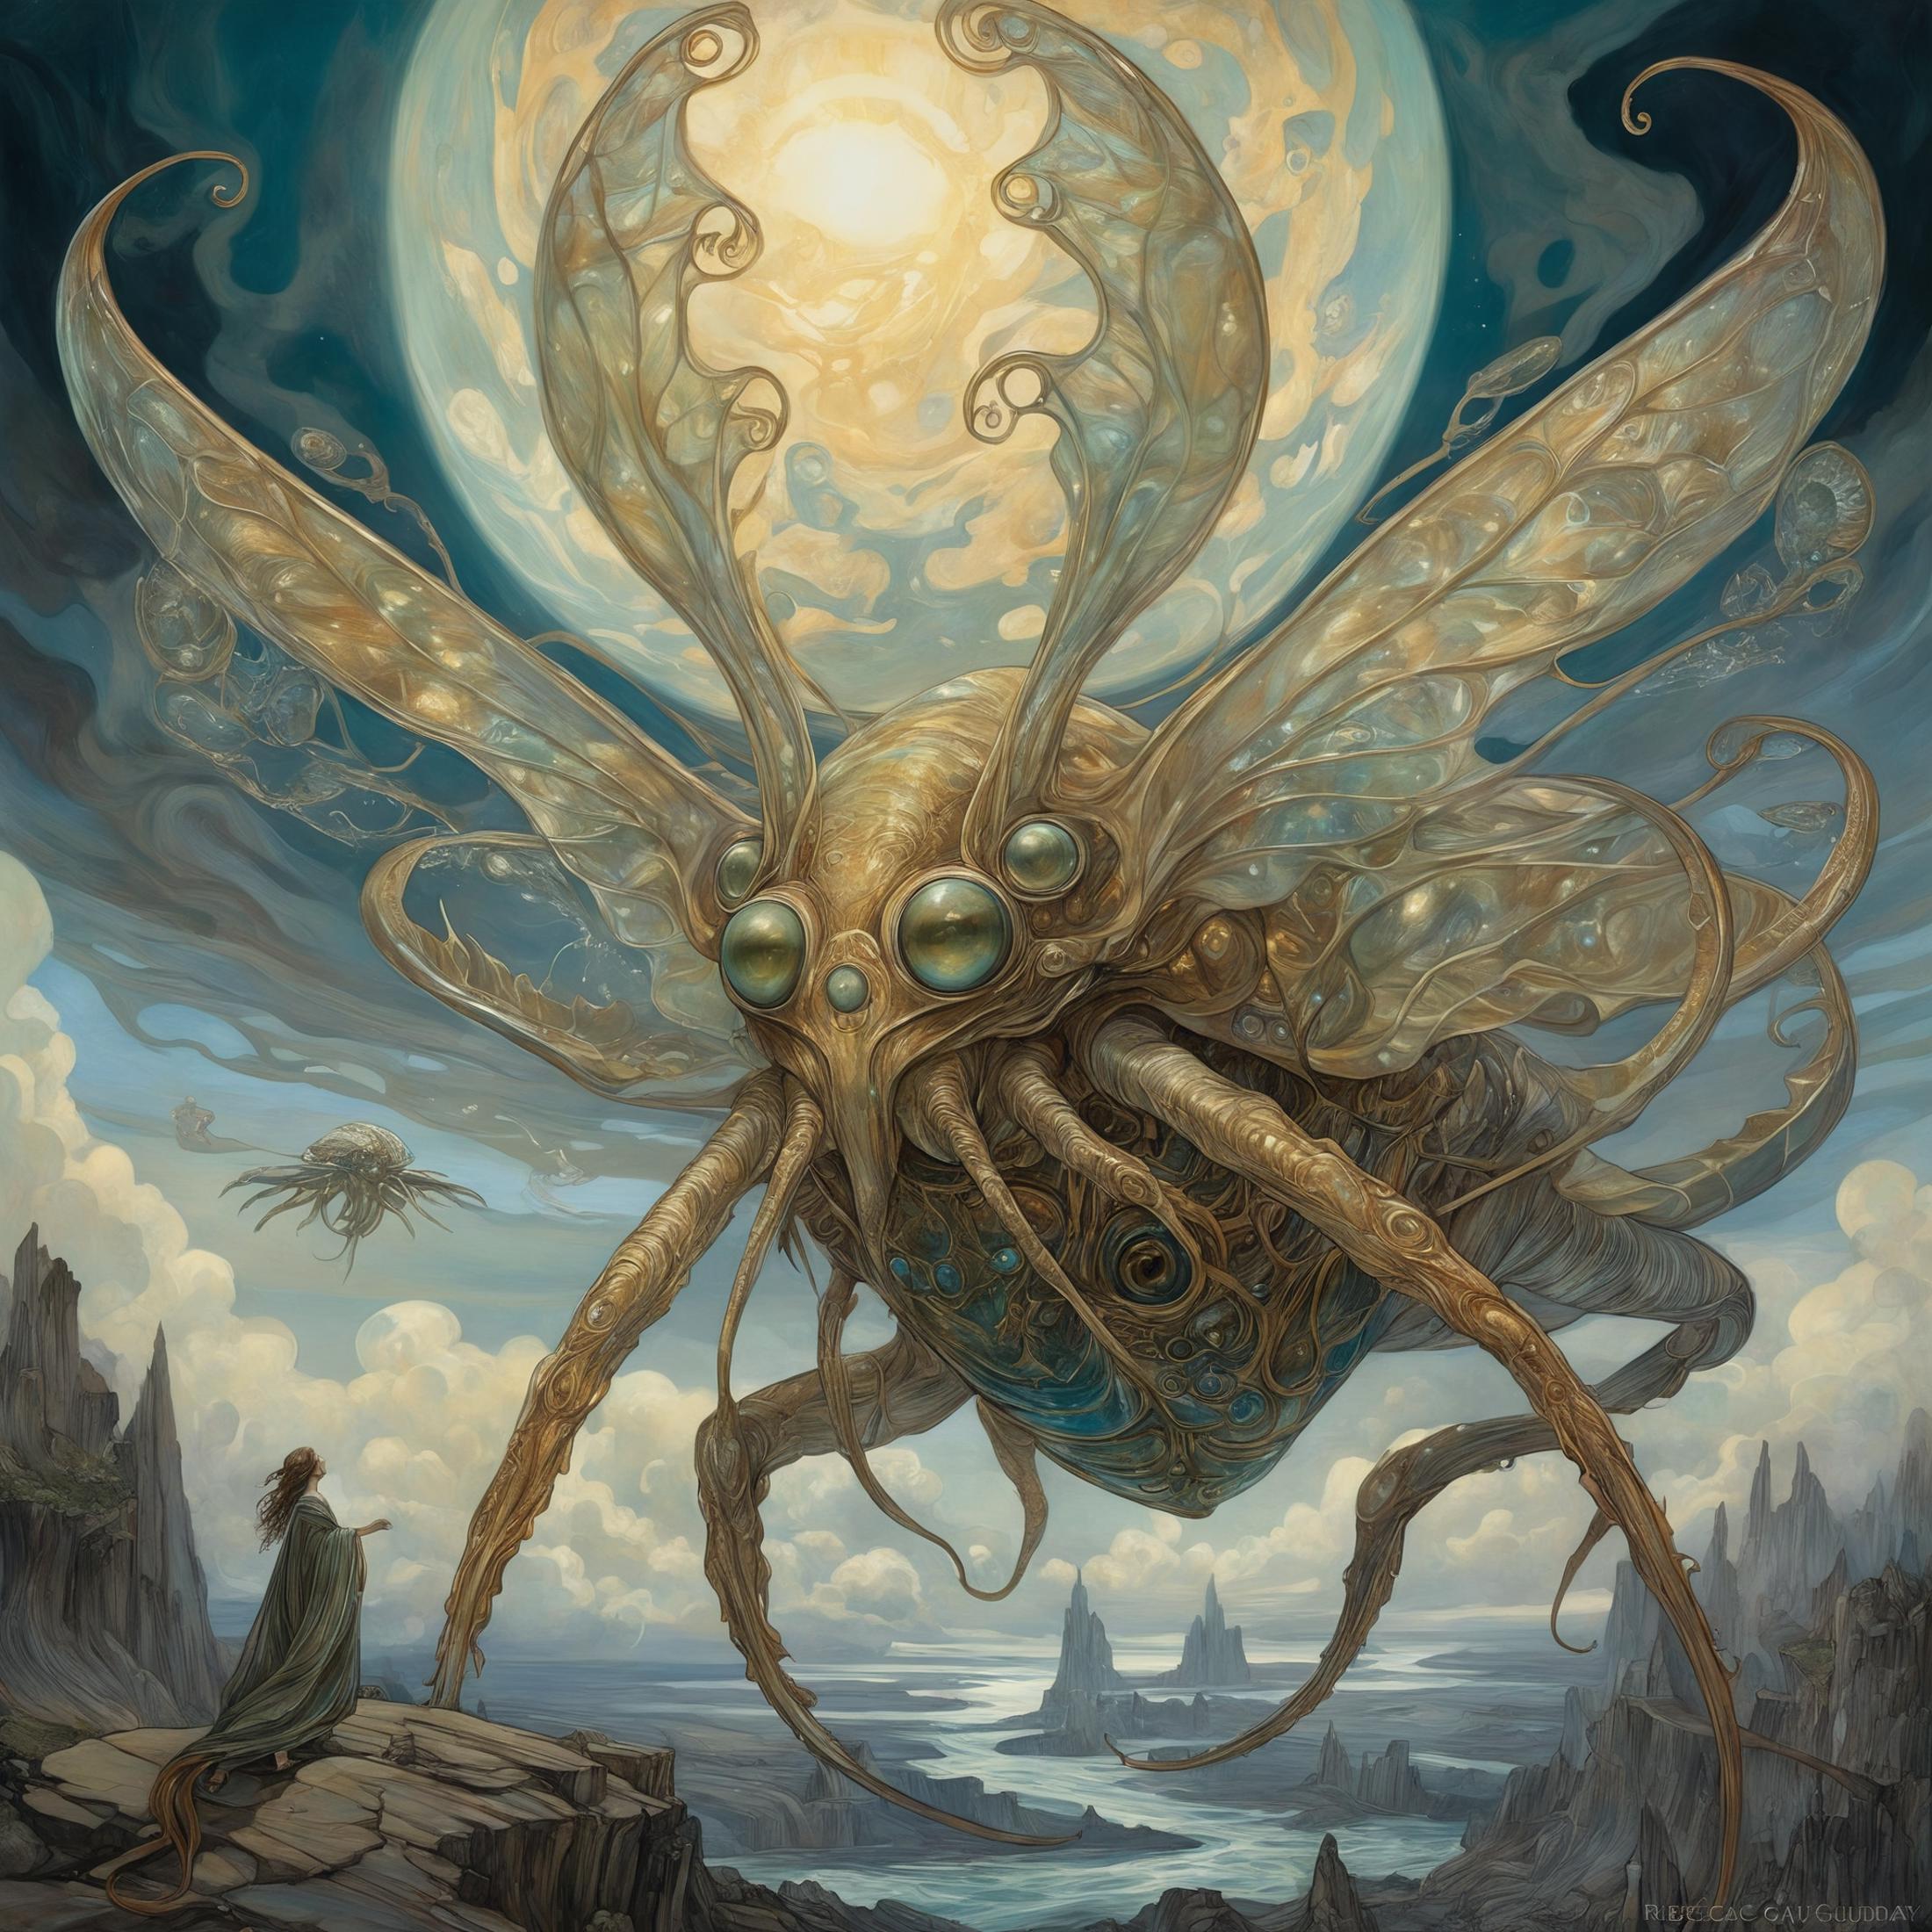 Artistic Fantasy Painting of a Moonlit Scene with a Giant Butterfly and a Man